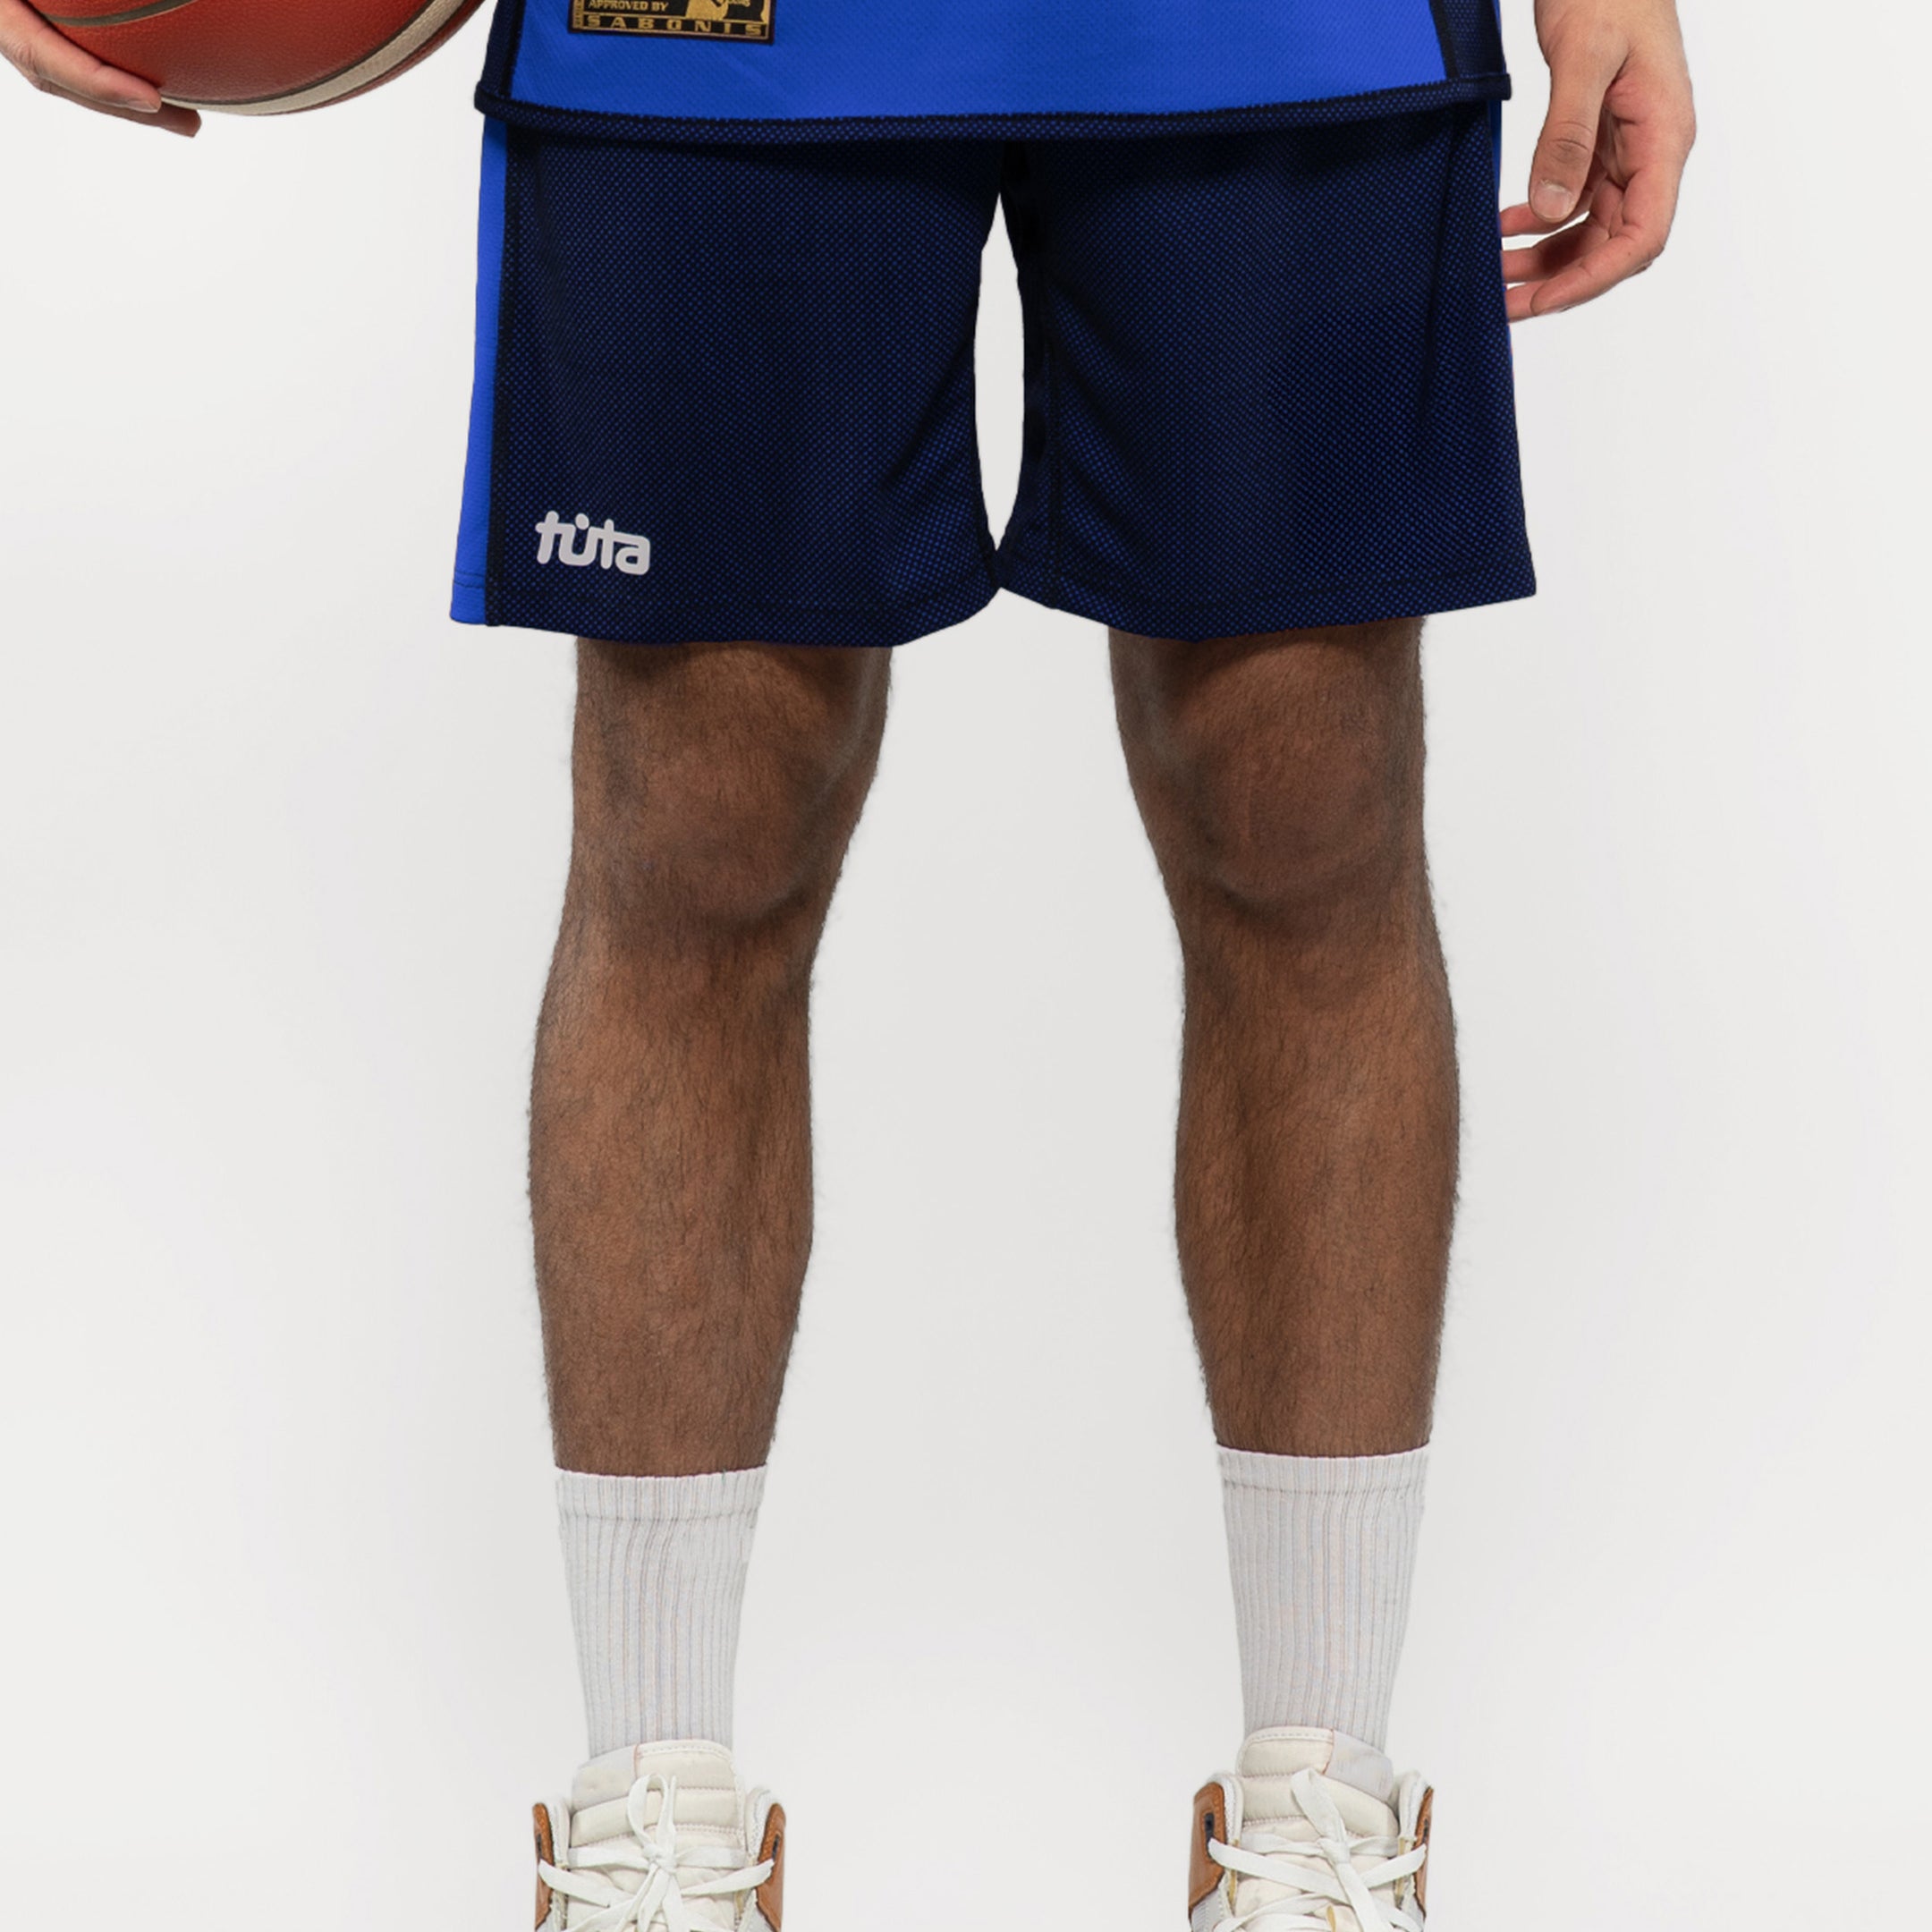 Double sided basketball shorts with number